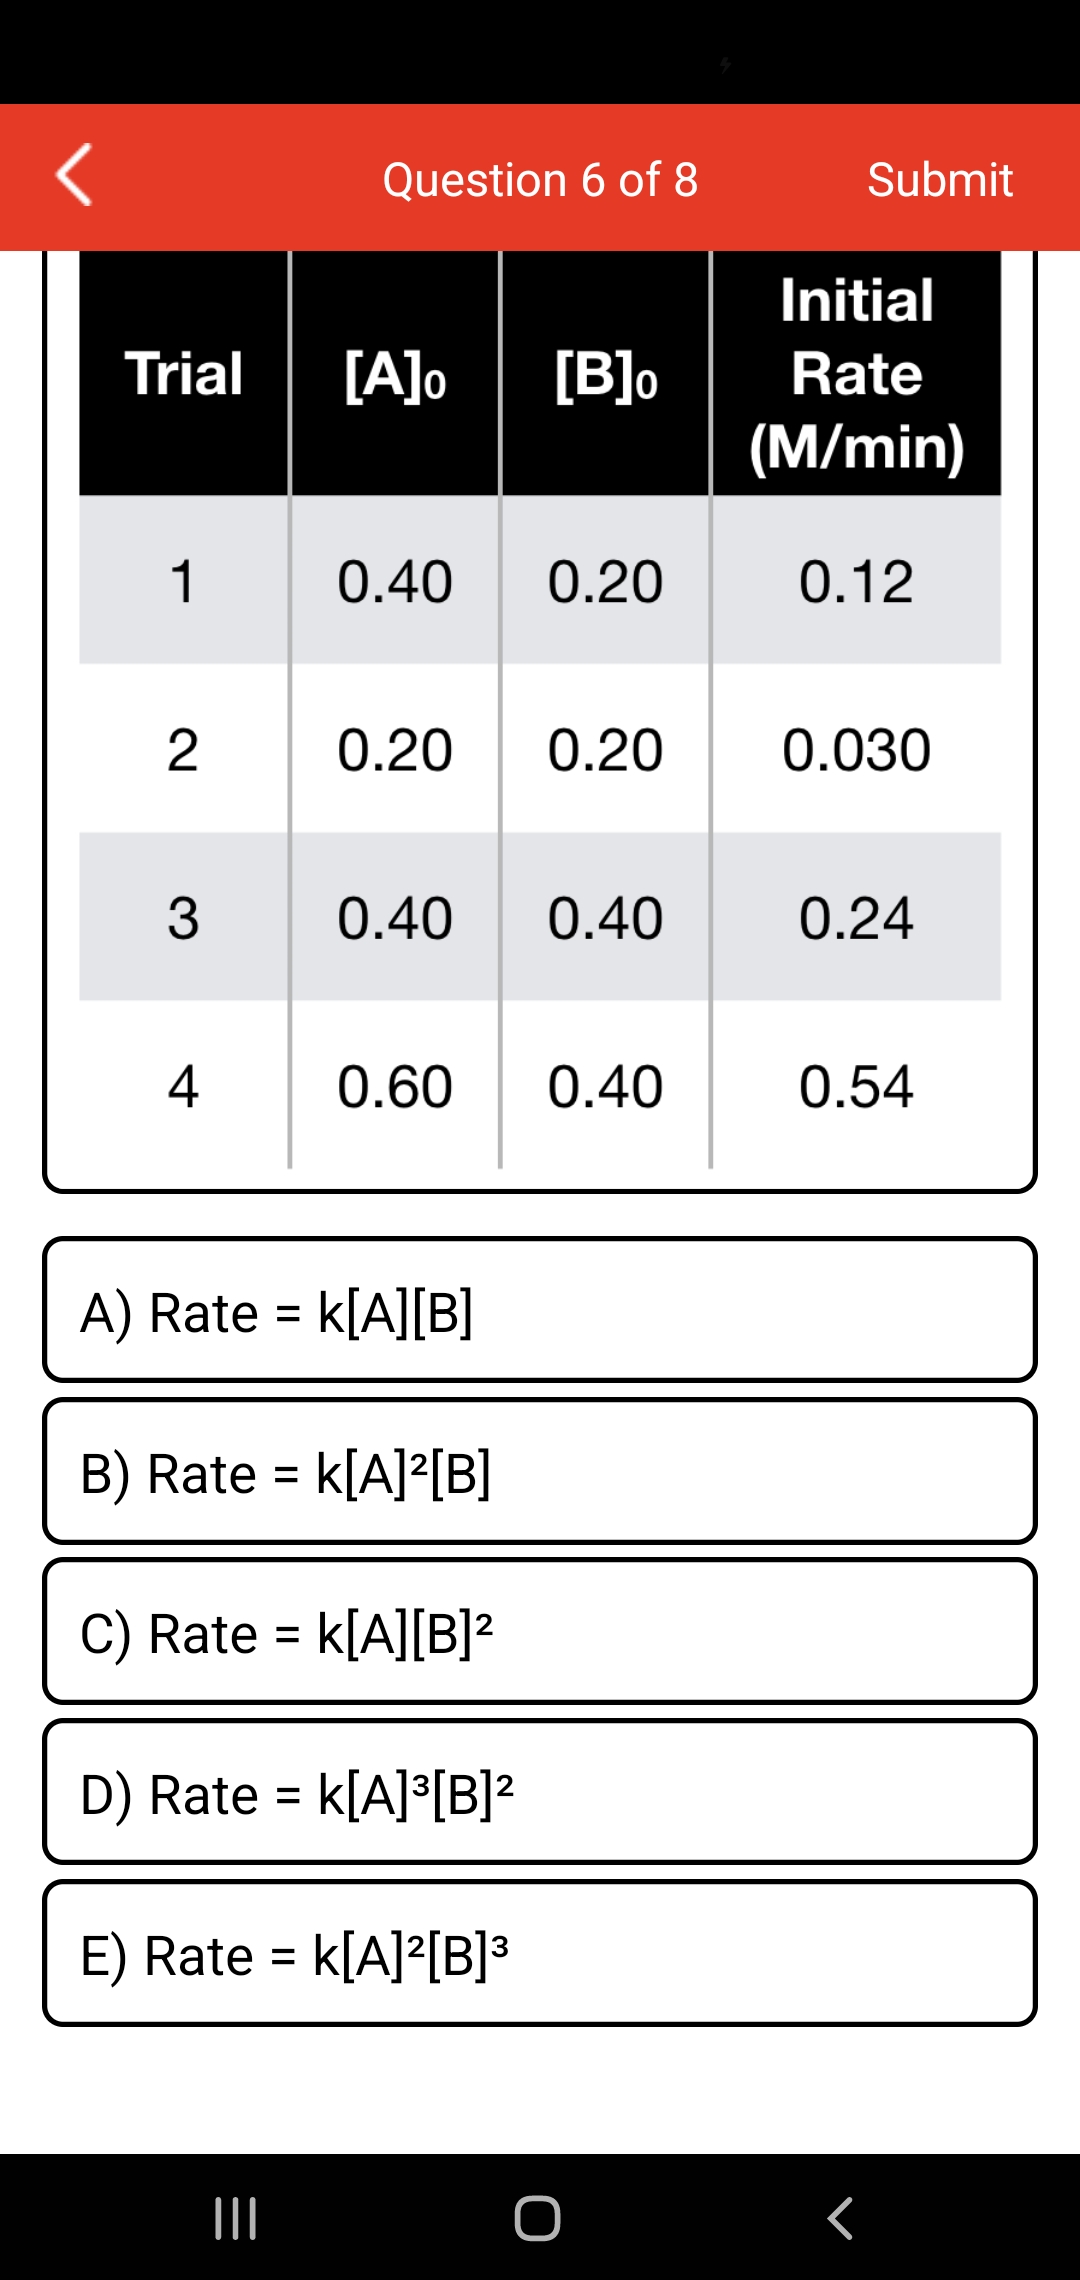 Question 6 of 8
Submit
Initial
Trial
[A]
[B]
Rate
(M/min)
1
0.40
0.20
0.12
2
0.20
0.20
0.030
3
0.40
0.40
0.24
4
0.60
0.40
0.54
A) Rate = k[A][B]
B) Rate = k[A]?[B]
%3D
C) Rate = k[A][B]?
%3D
D) Rate = k[A]³[B]?
E) Rate = k[A]?[B]³
